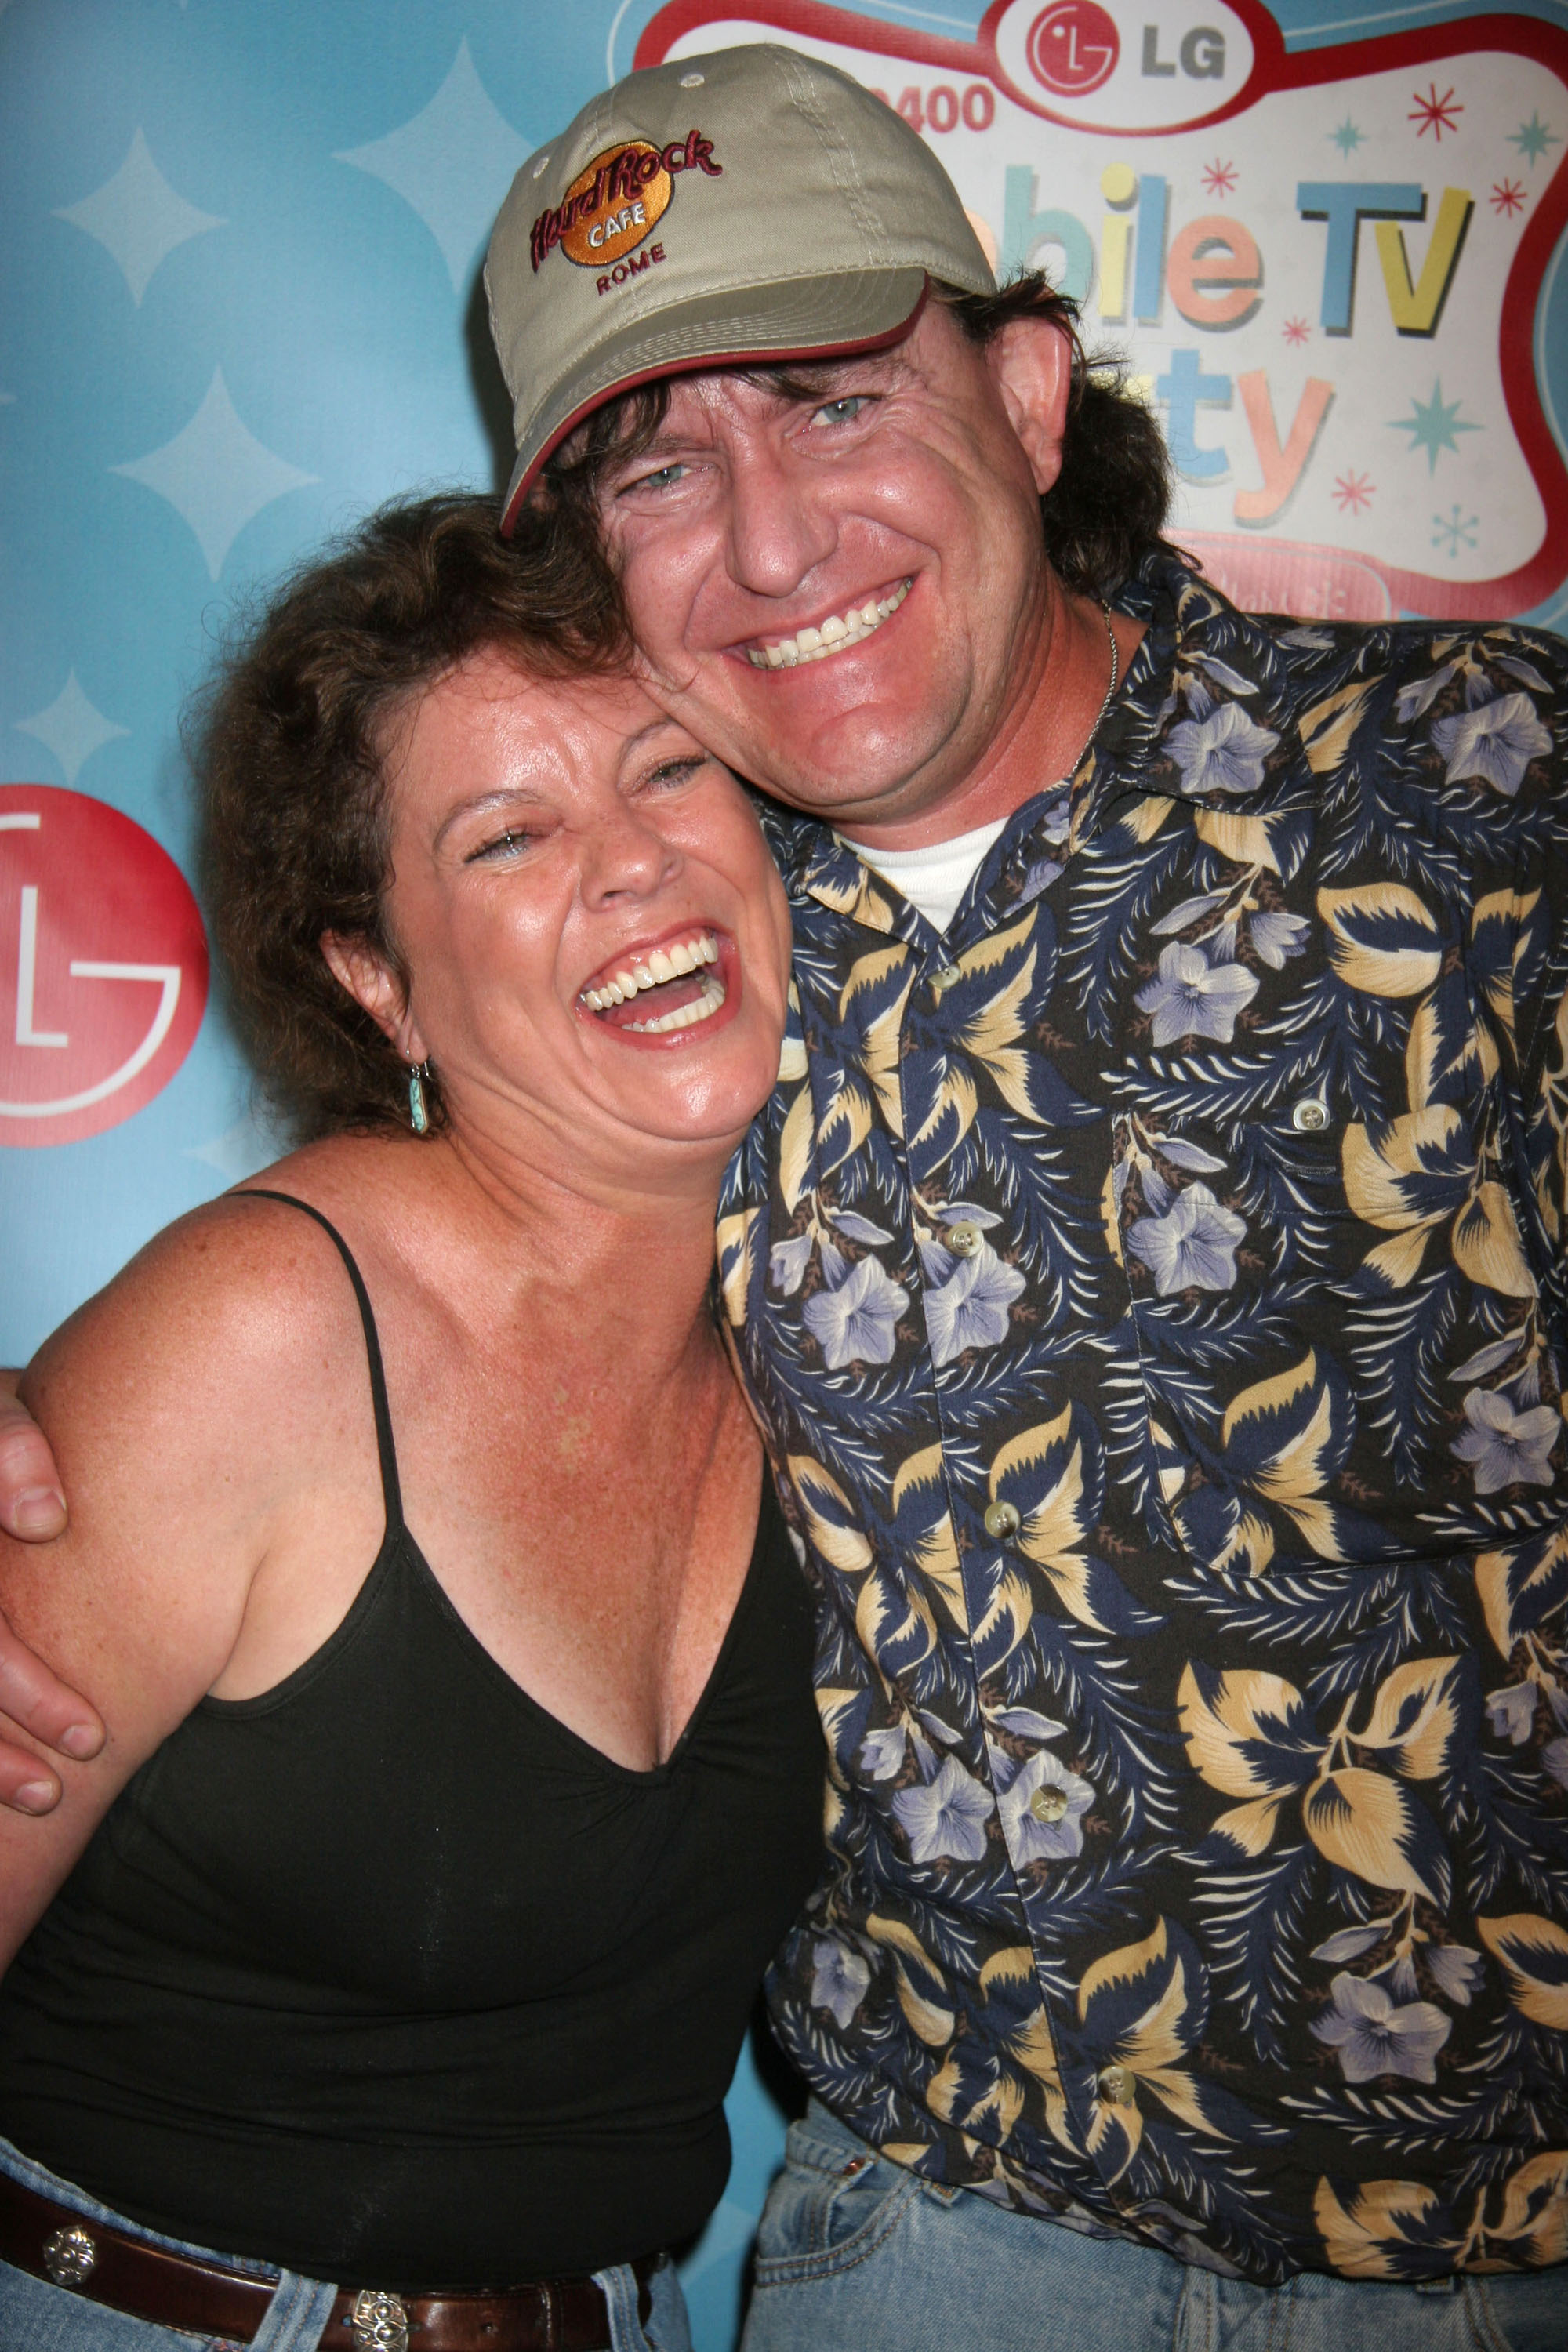 Actress Erin Moran and husband Steven Fleischmann in Los Angeles, California on June 19, 2007 | Source: Getty Images